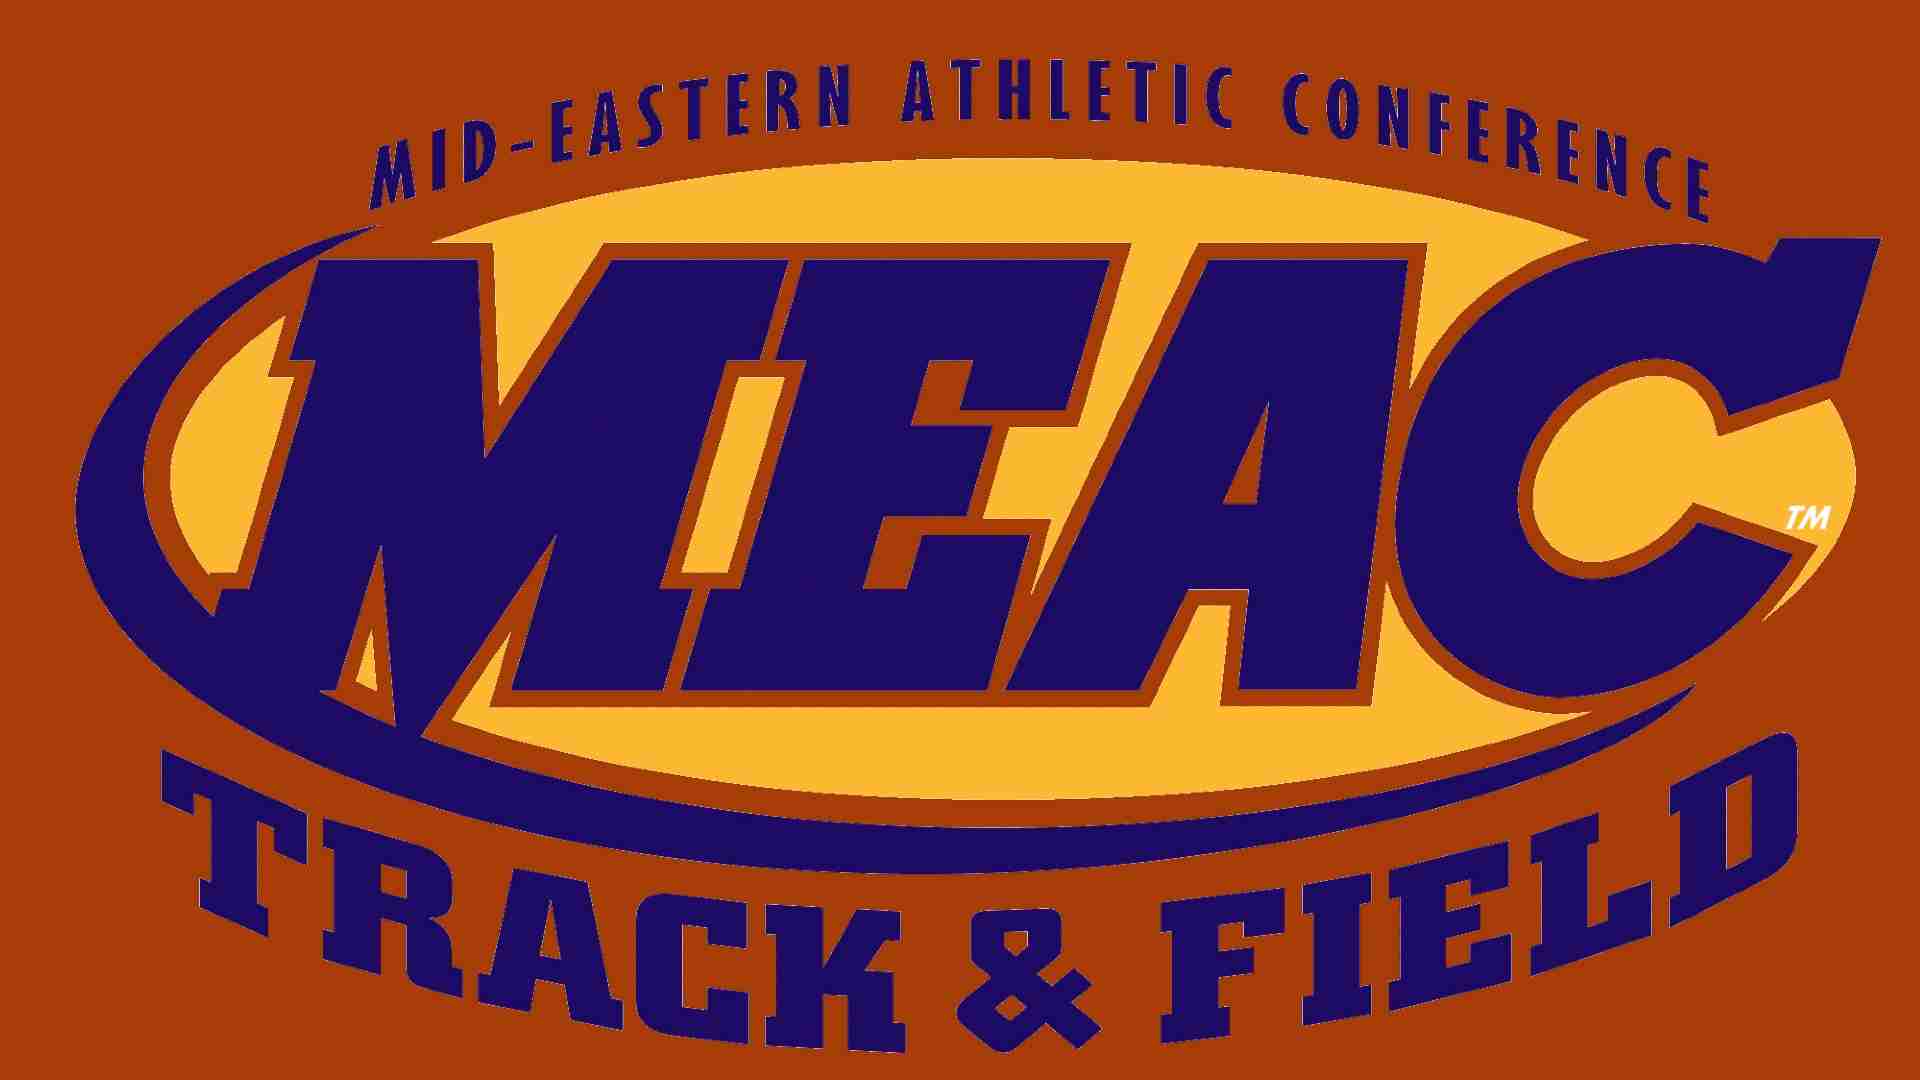 How to watch the 2022 MEAC Indoor Championships?